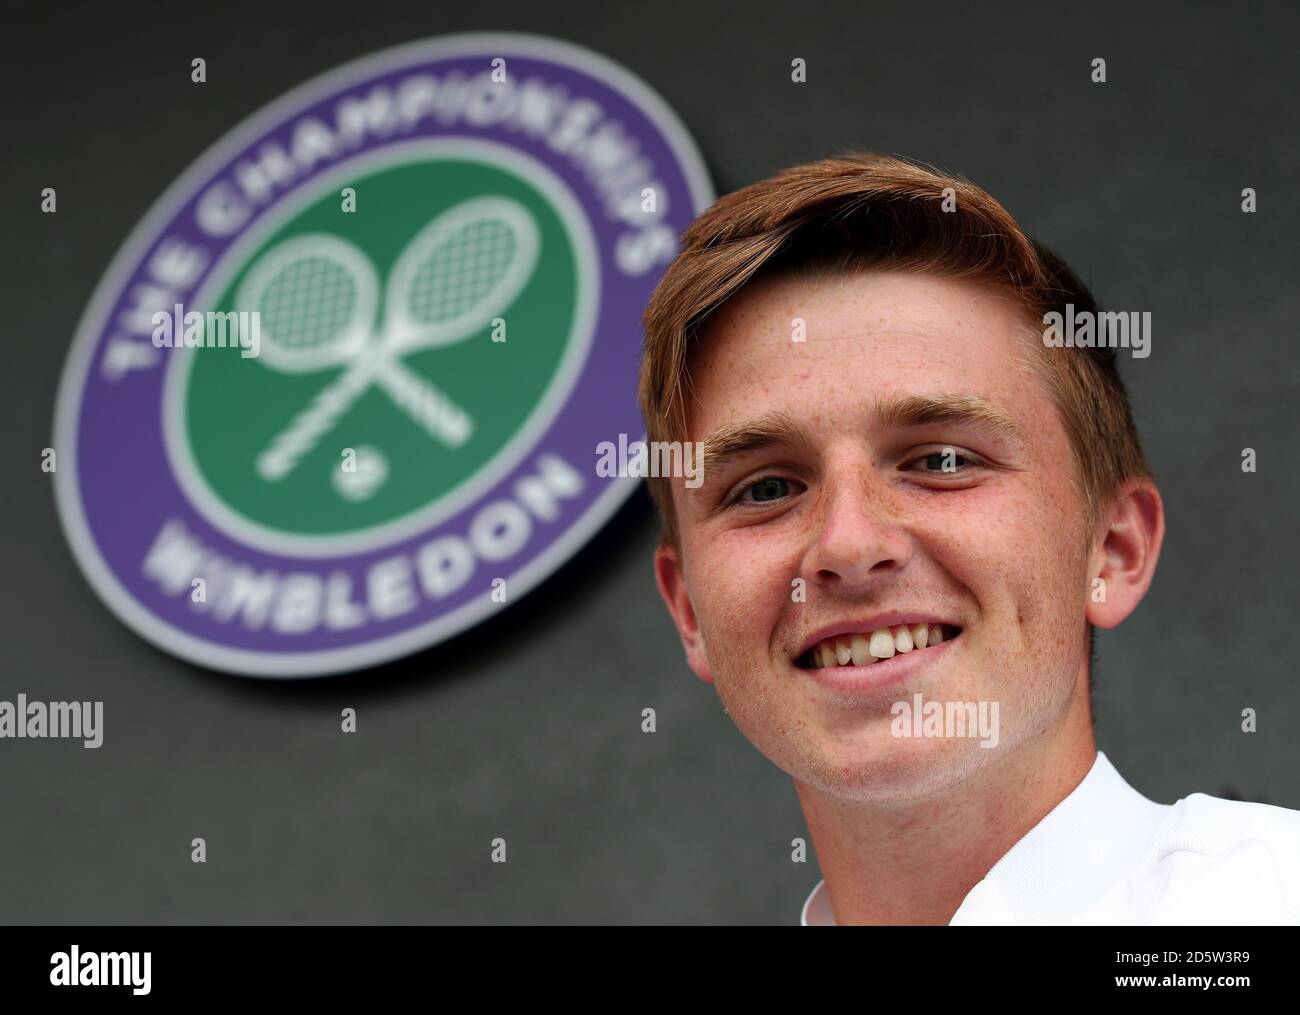 Aidan Mchugh poses for a photo within the grounds on day eleven of the Wimbledon Championships at The All England Lawn Tennis and Croquet Club, Wimbledon Stock Photo